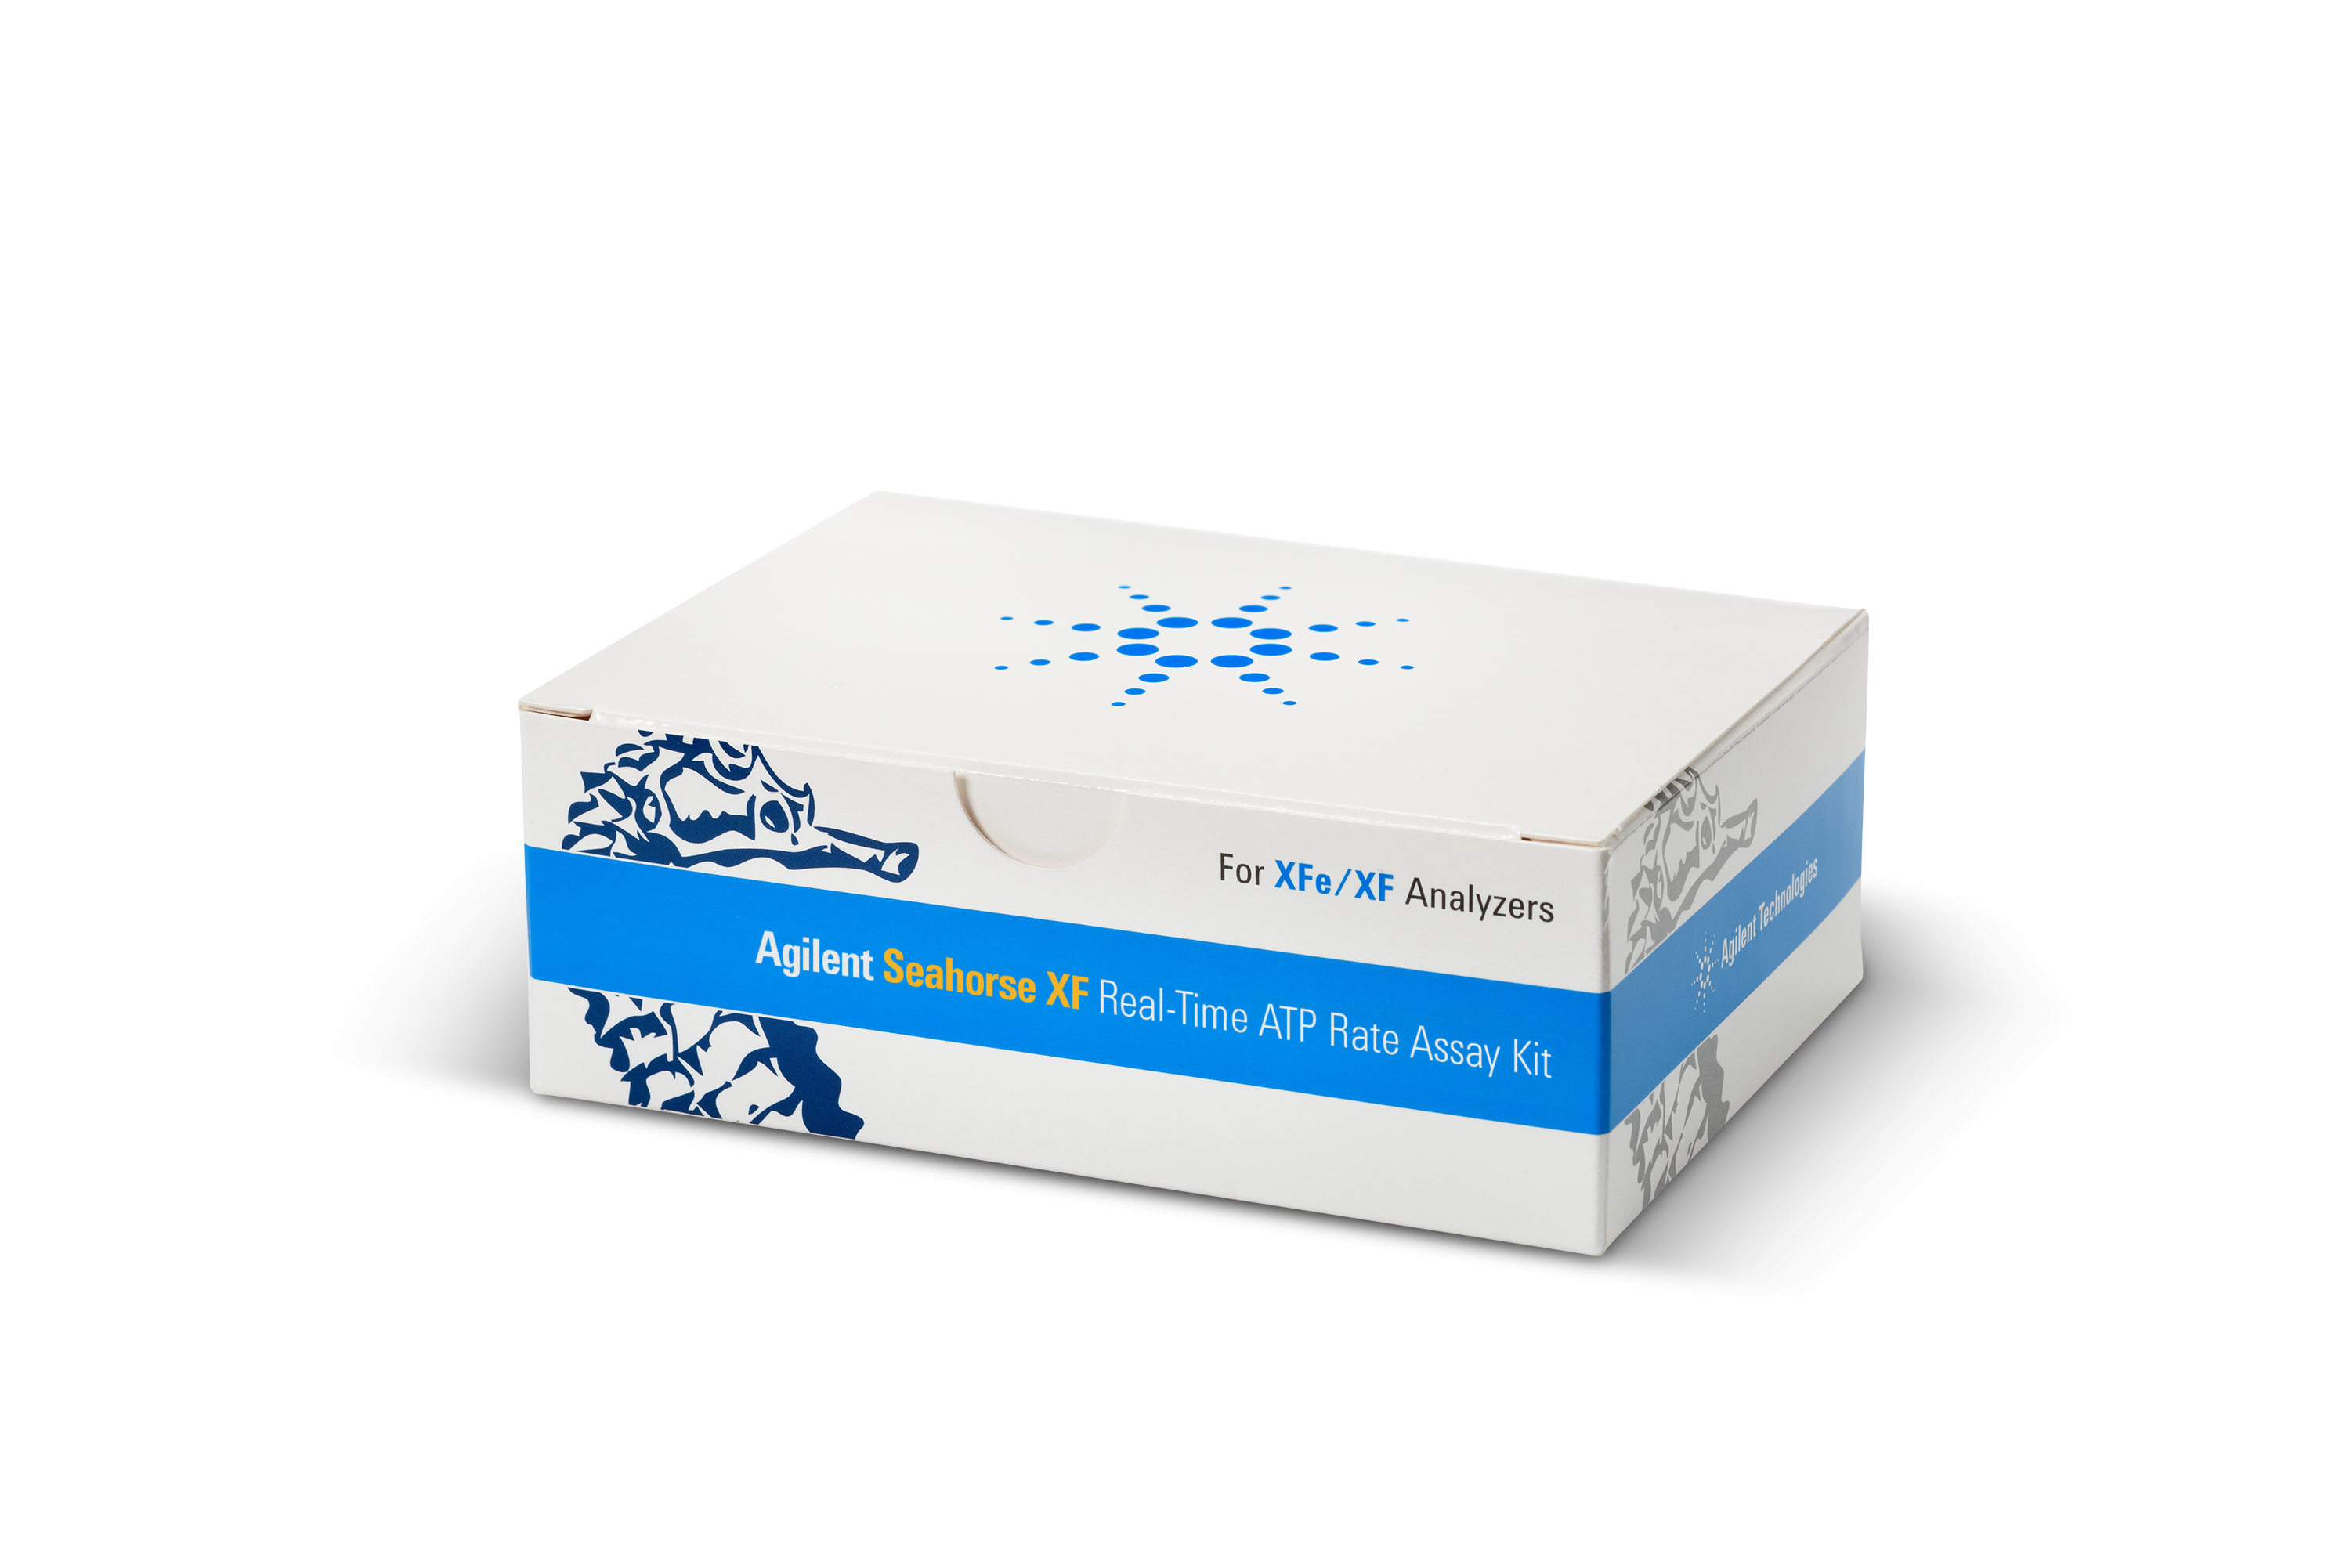 Seahorse XF Real-Time ATP Rate Assay Kit